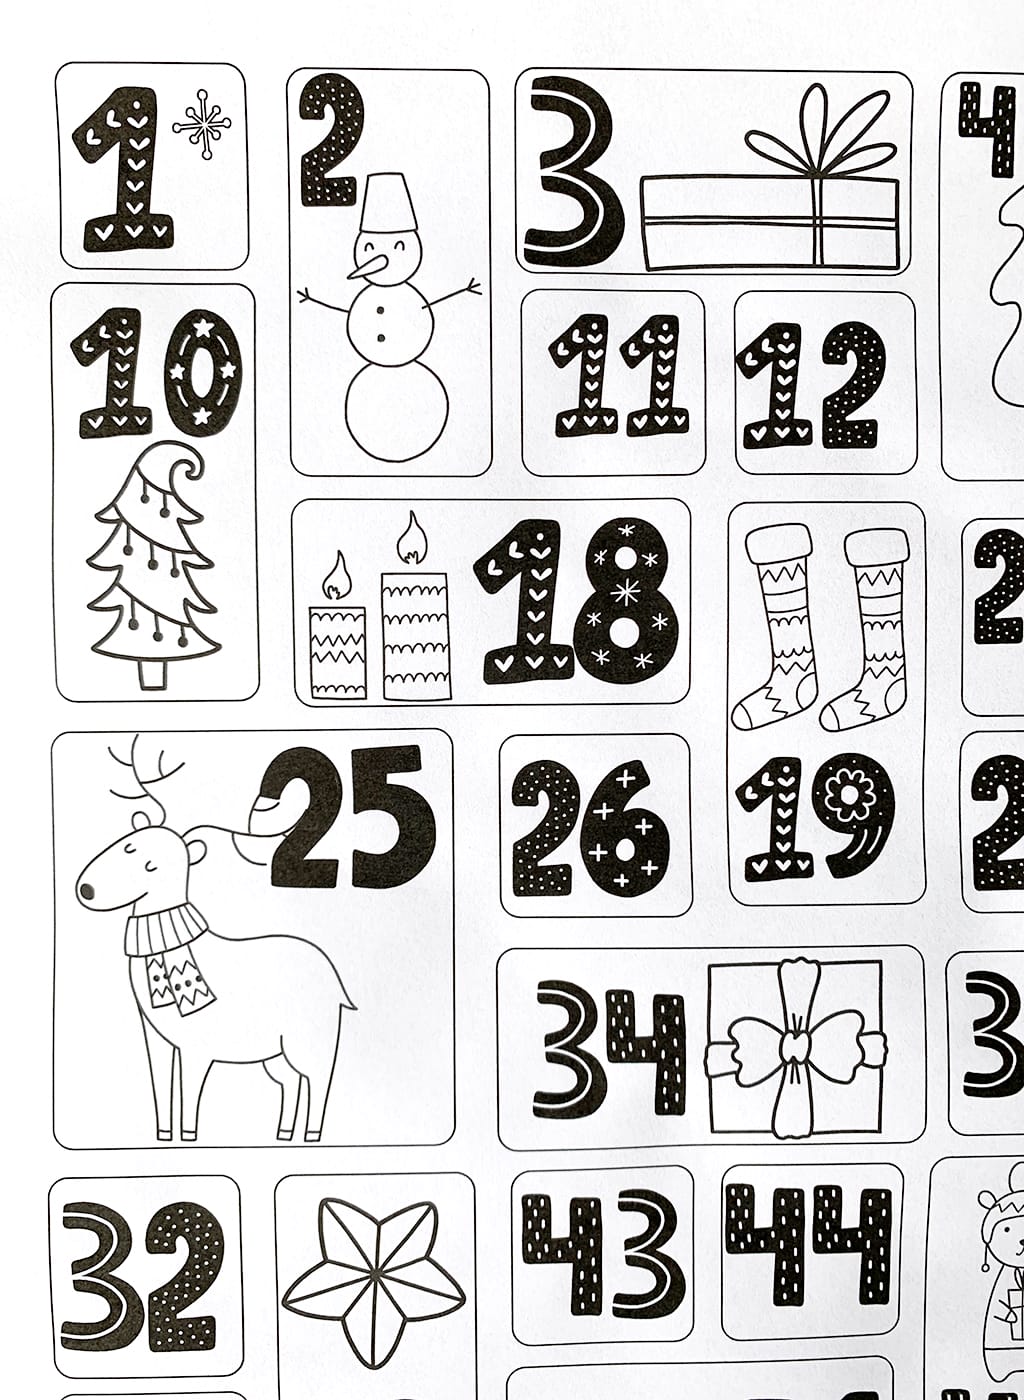 100 acts of kindness coloring countdown black and white print out.